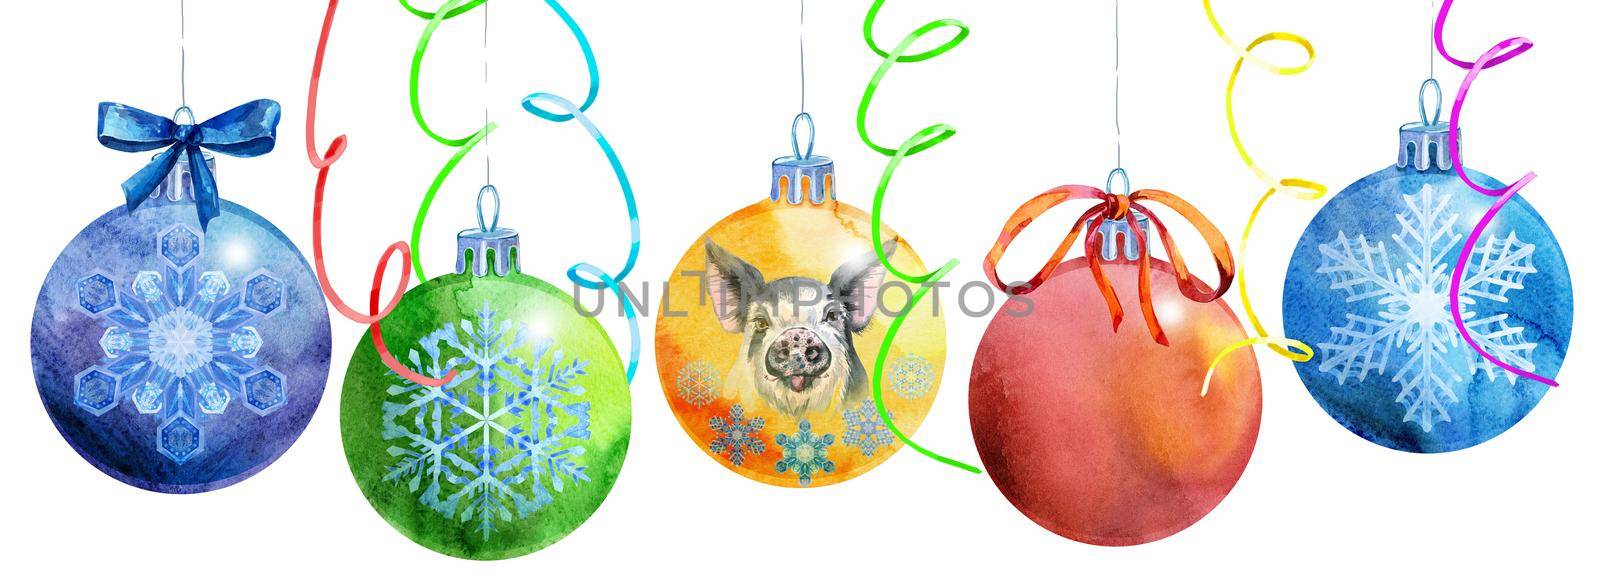 Border with watercolor Christmas balls with image of pig and snowflakes. Card for your creativity